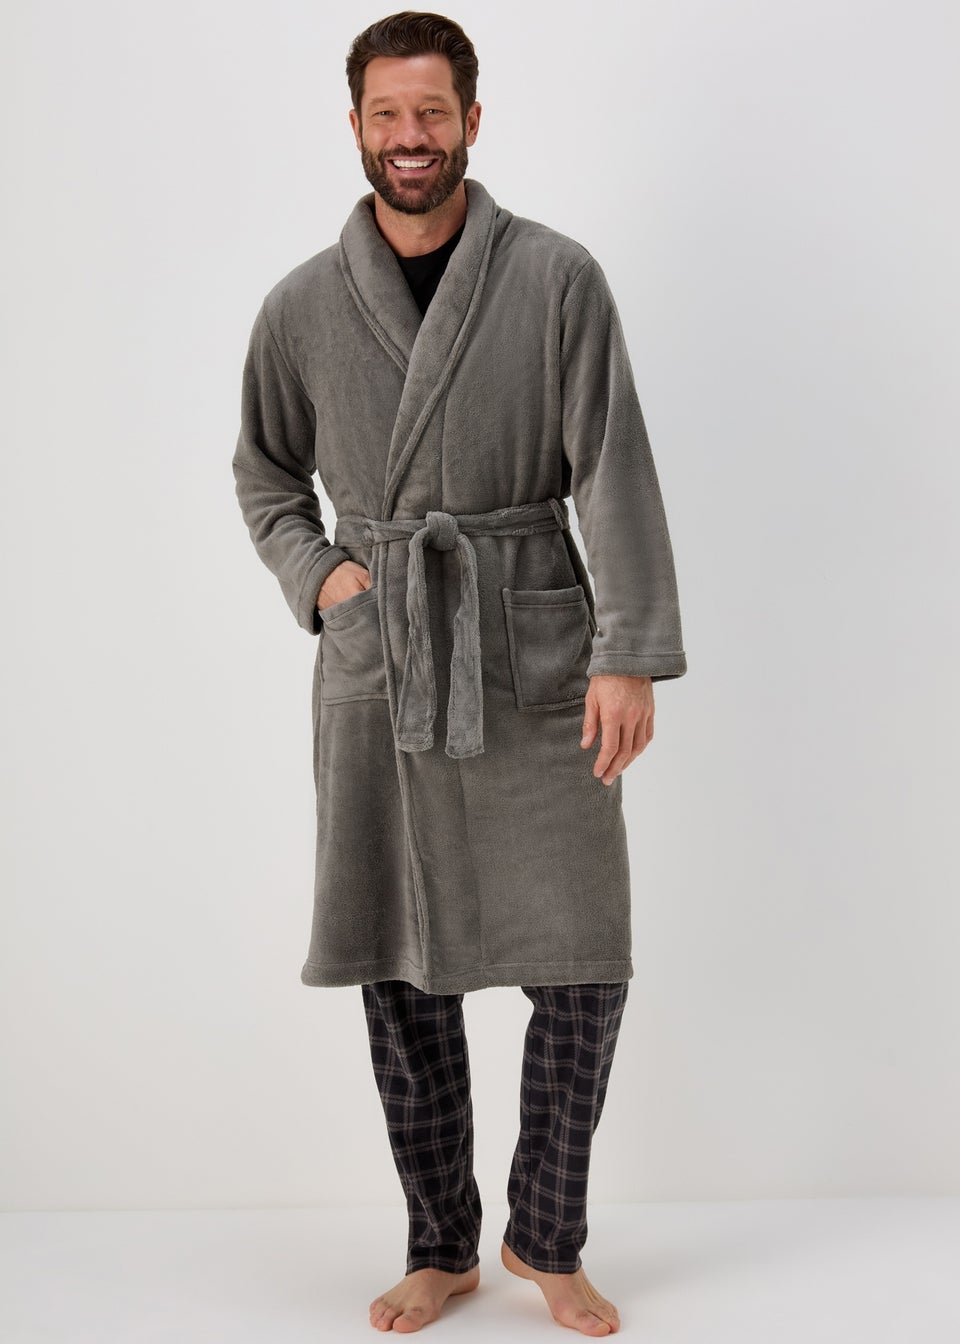 Men's Classic Pajamas, Slippers, & Robes (Dressing Gowns) - YouTube